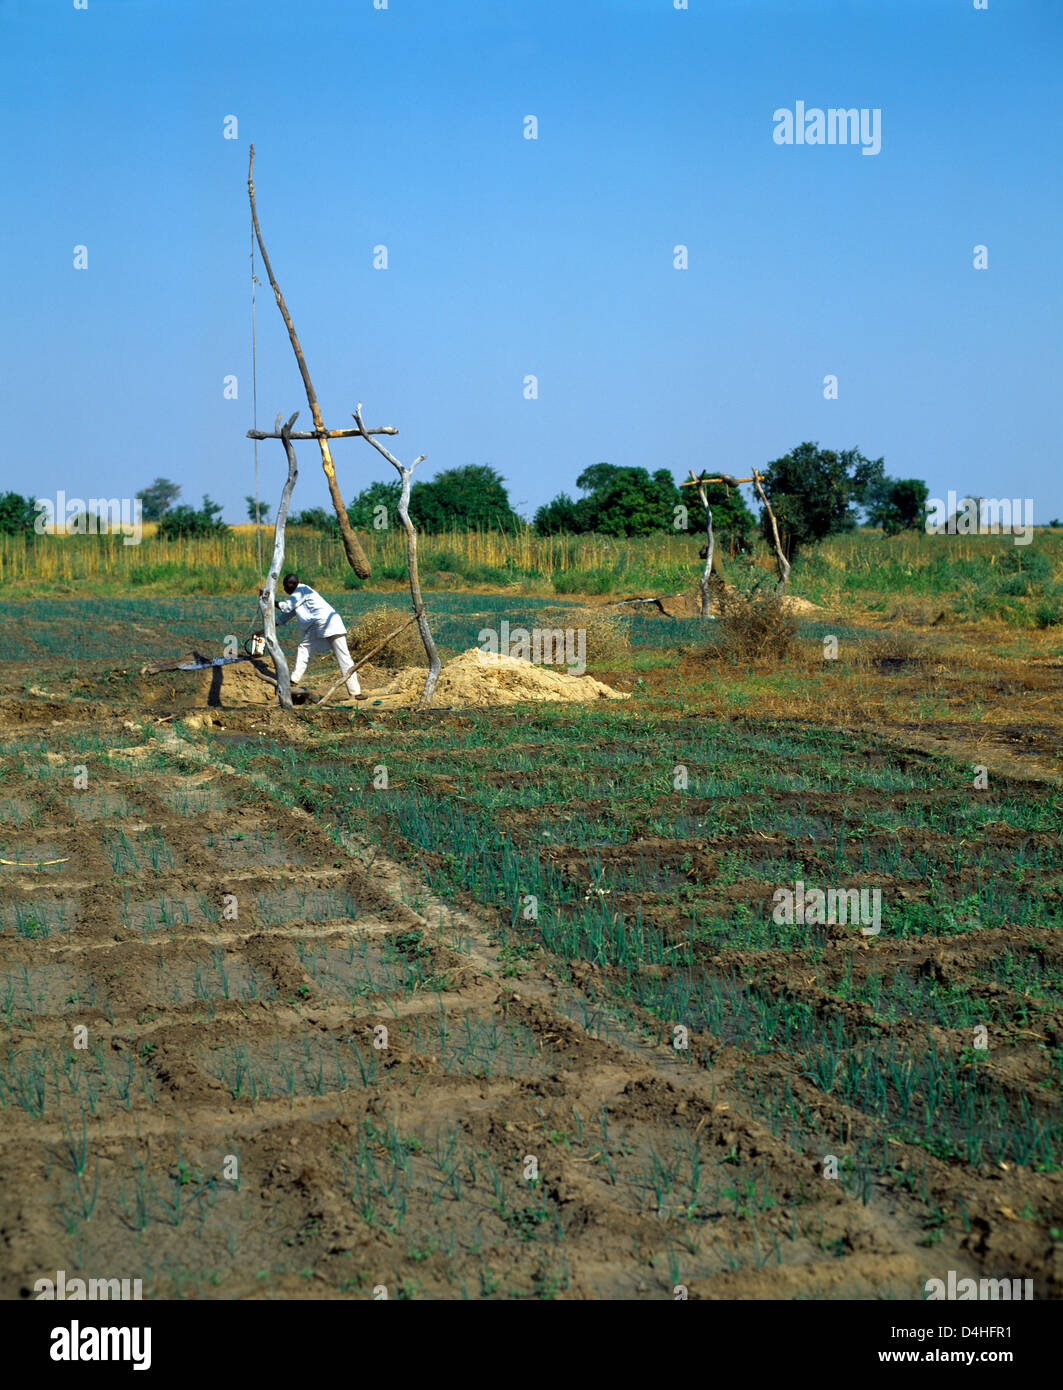 Maroua Cameroon Man By Water Well Used For Onion Fields Stock Photo